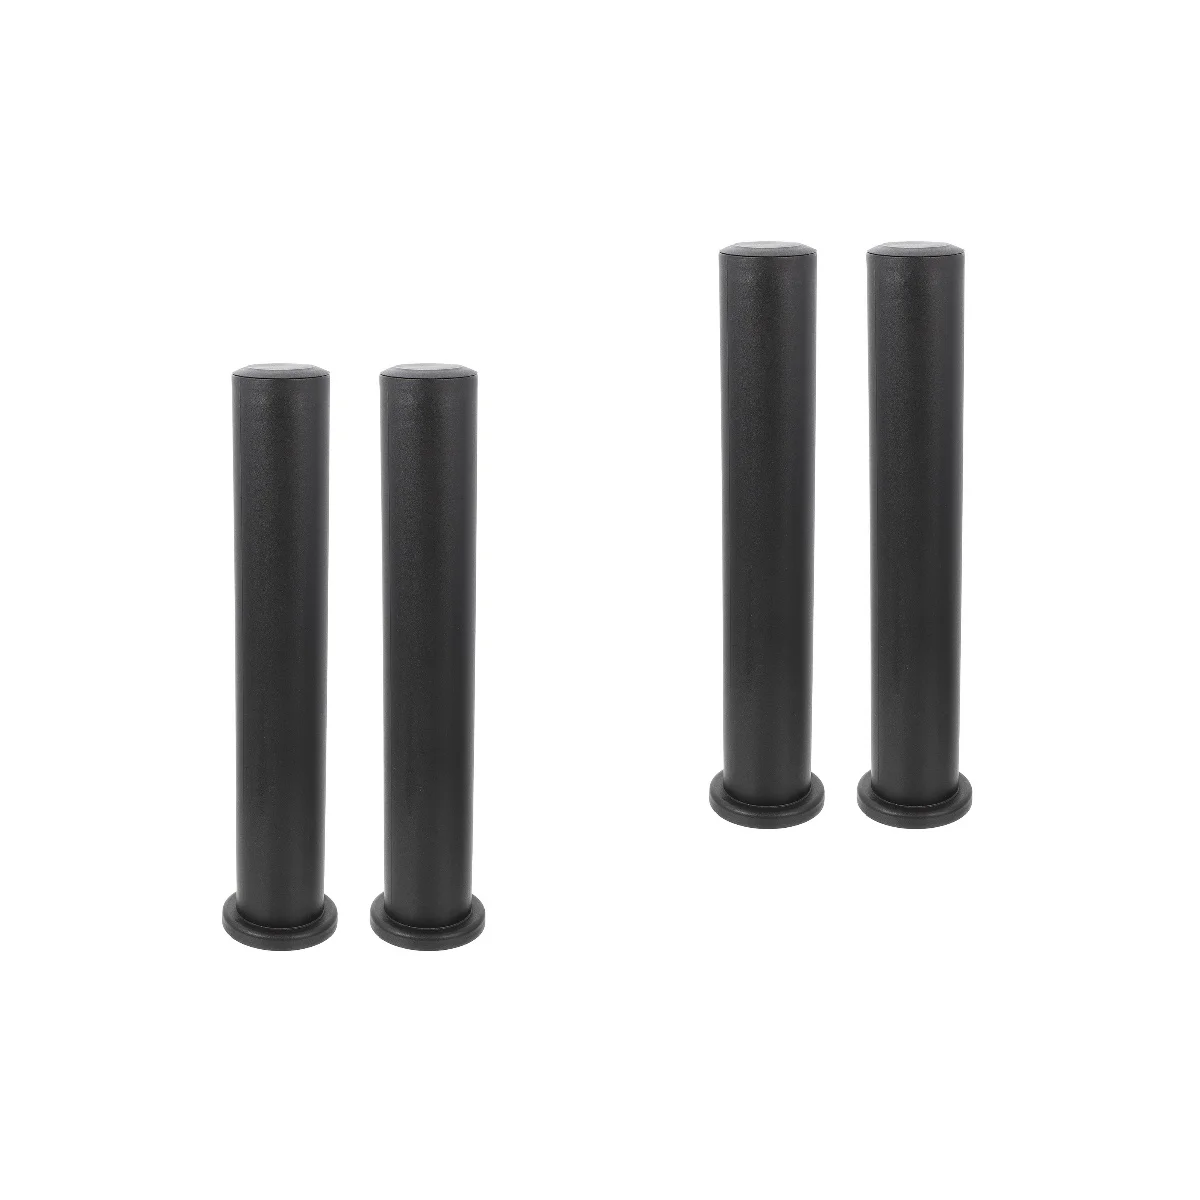 

2 Sets of Anti-skid Barbell Rod Sleeve Handlebar Grip for Barbell Gym Barbell Supply